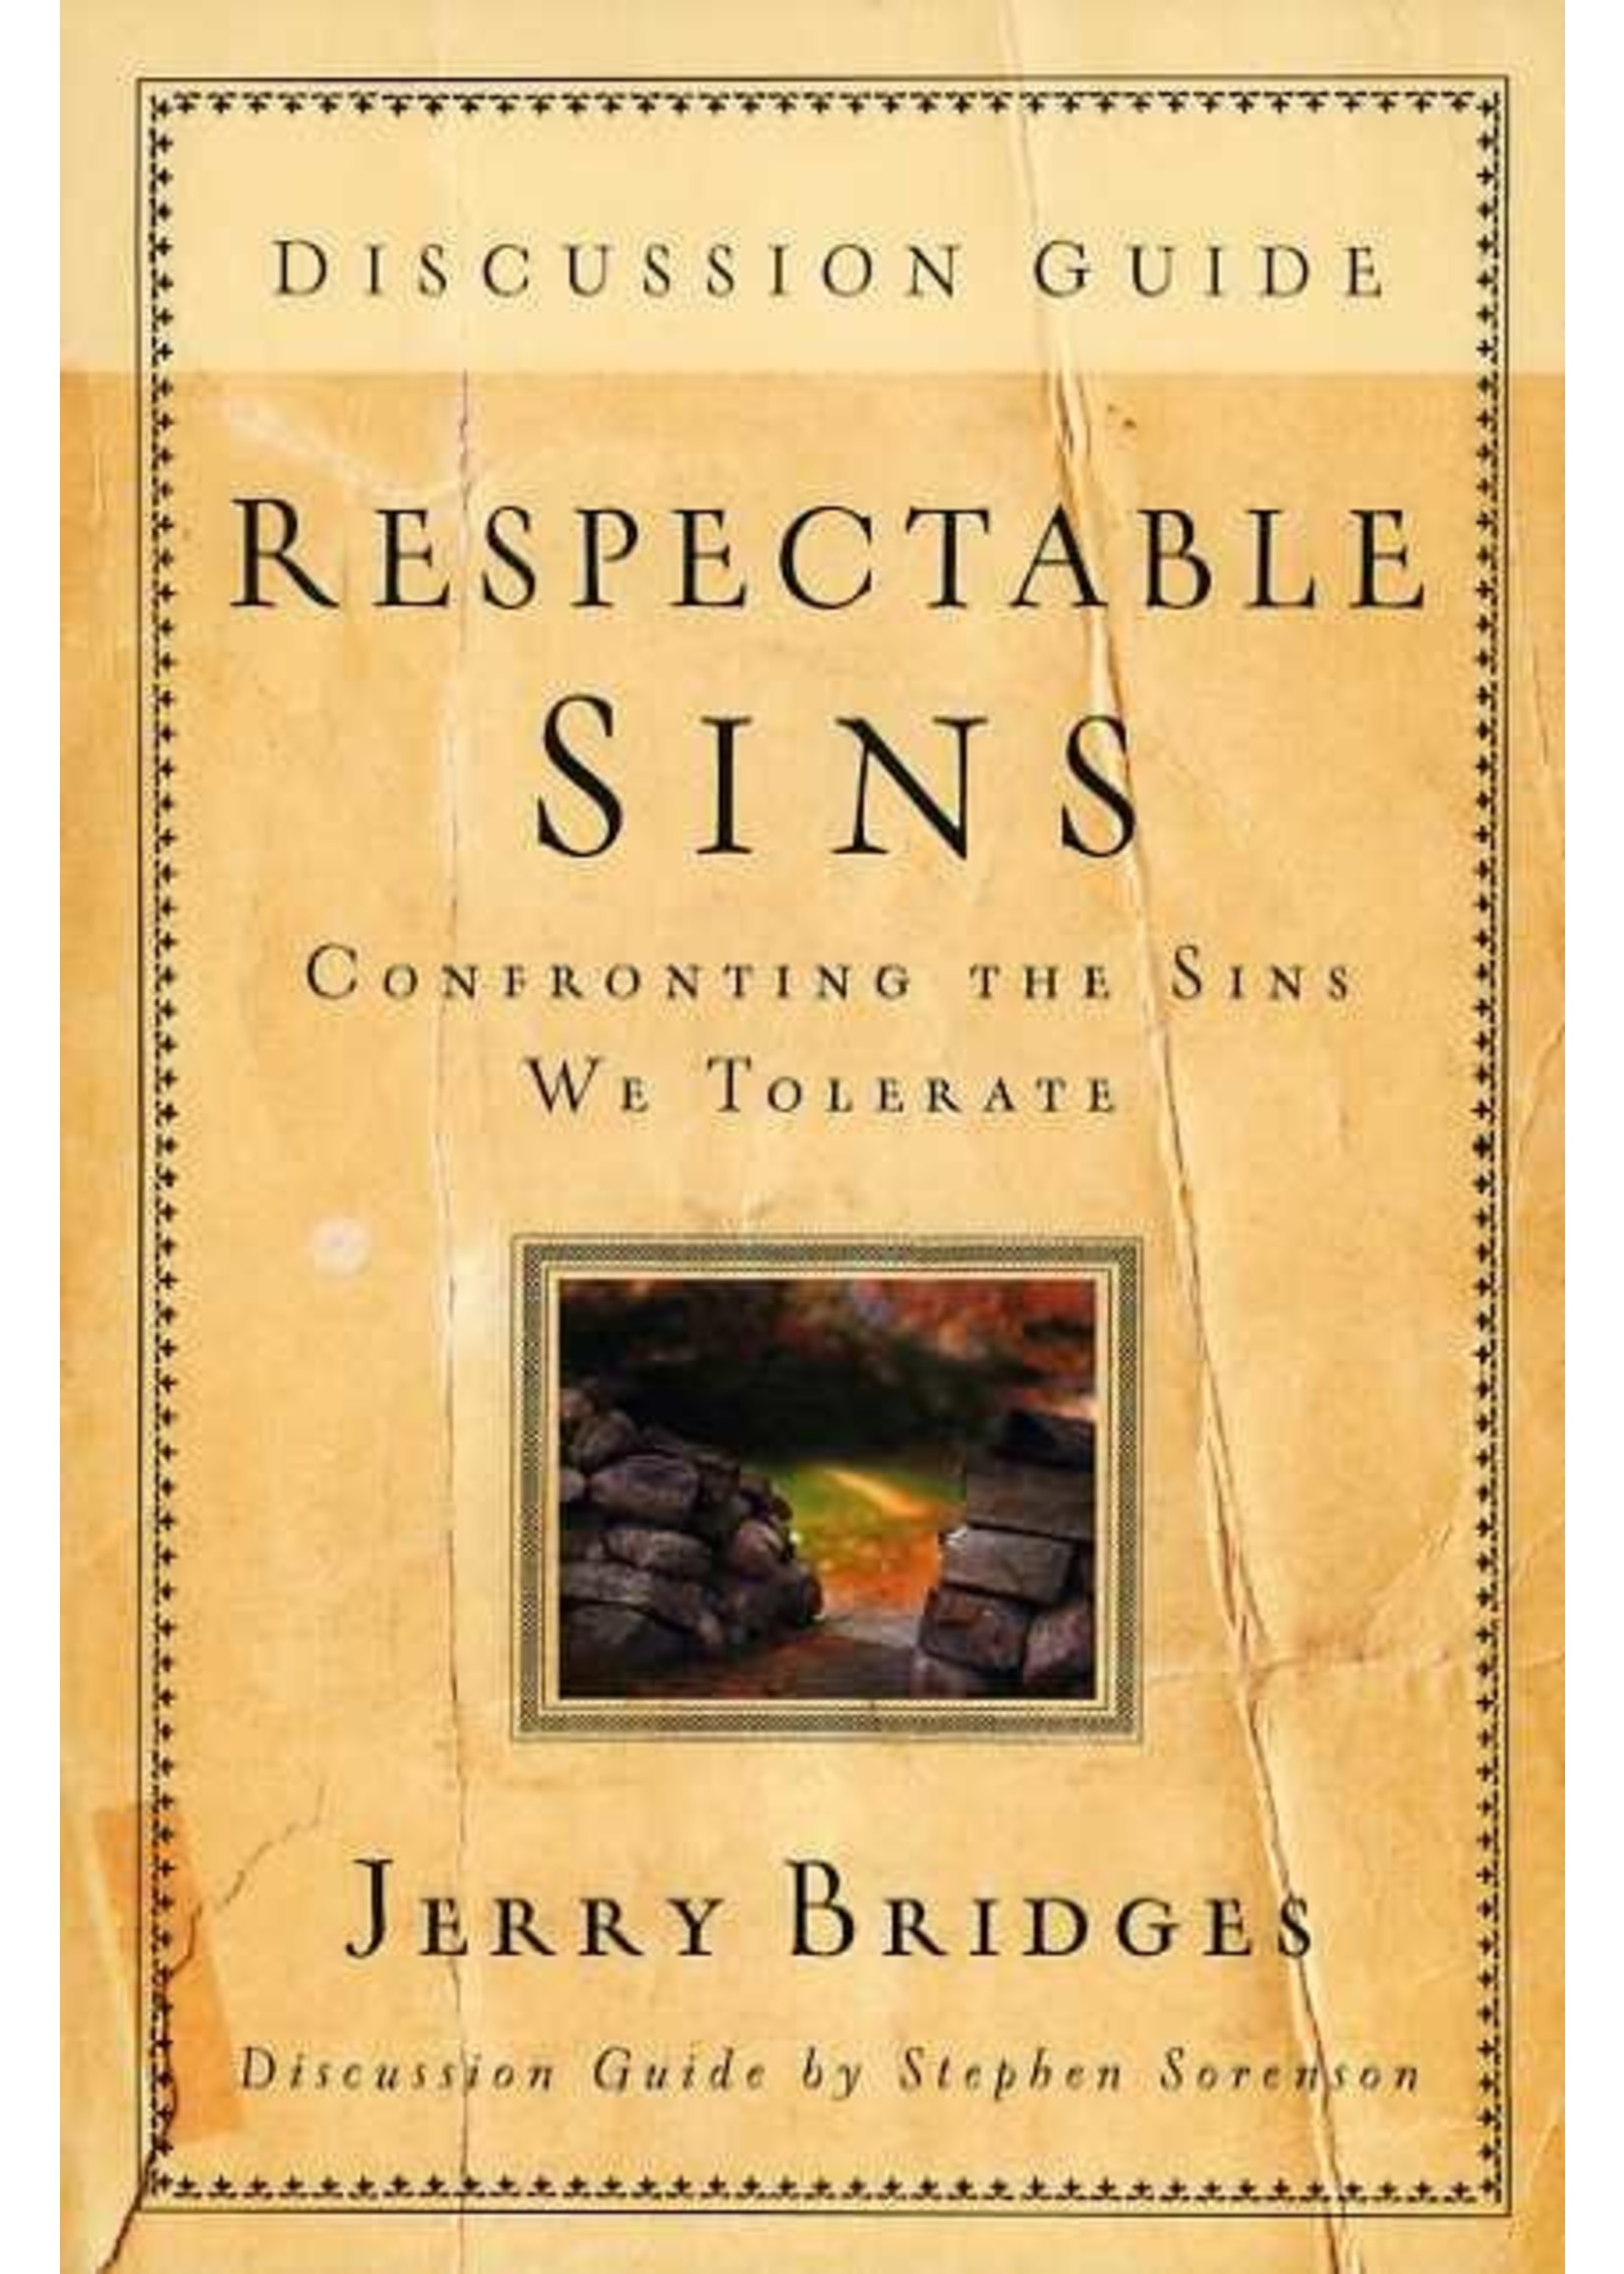 Tyndale Respectable Sins Discussion Guide - Jerry Bridges